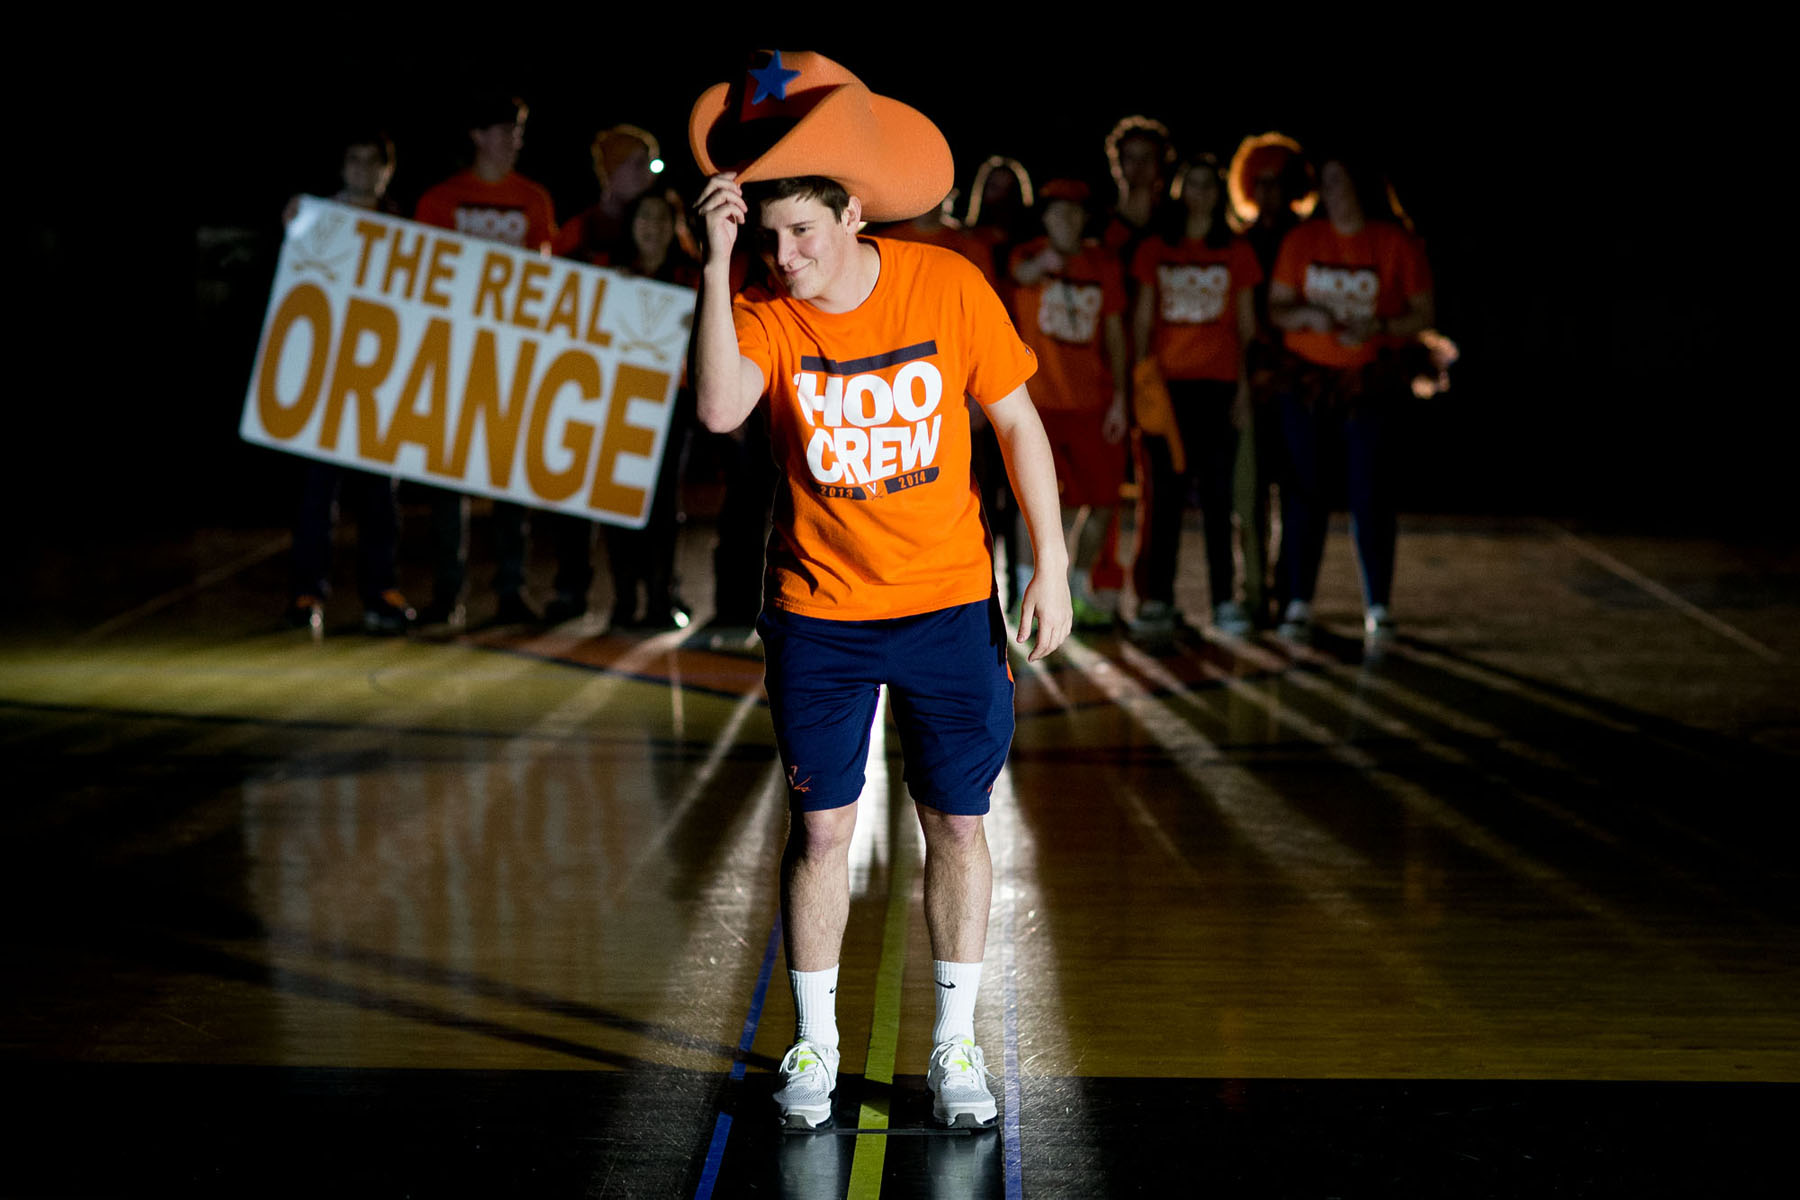 Man standing in front of a group of students all dressed in UVA gear tilting a big orange hat towards the camera